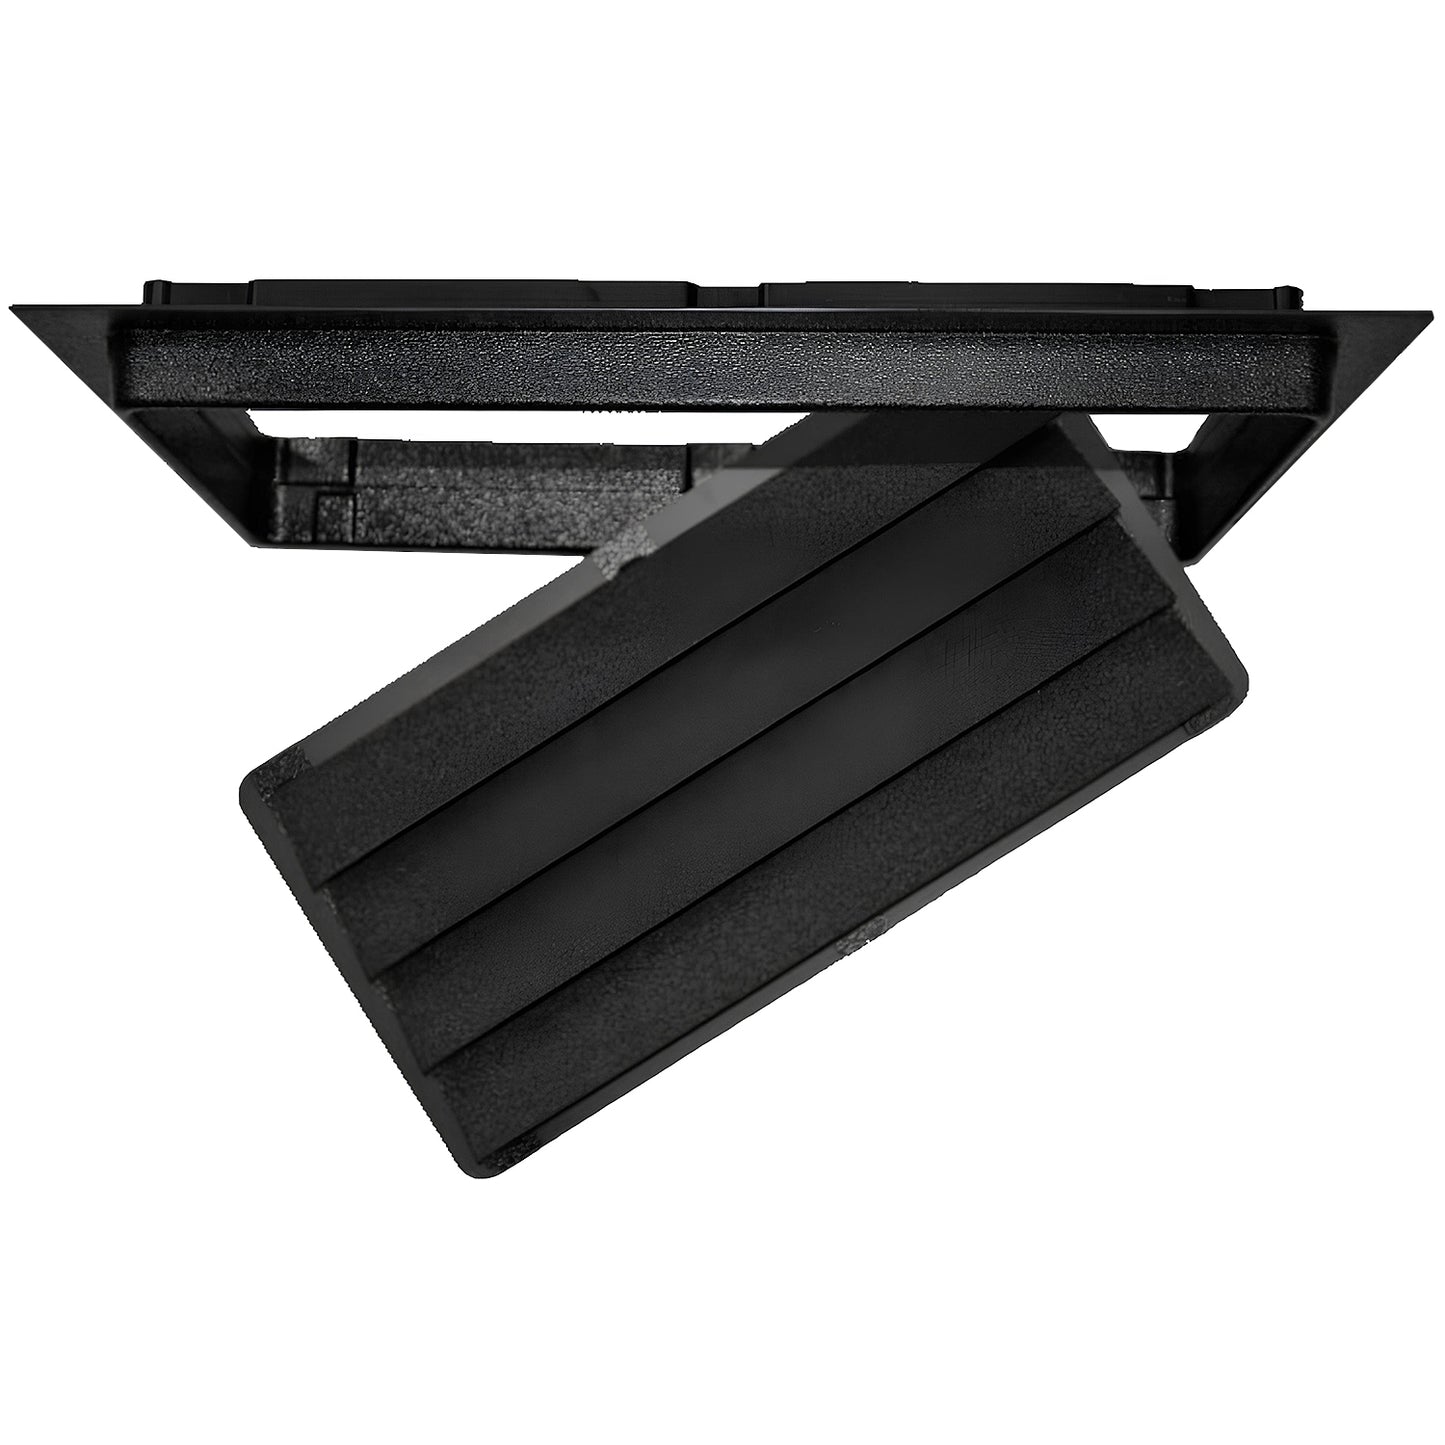 Top view of vented flood vent (black)